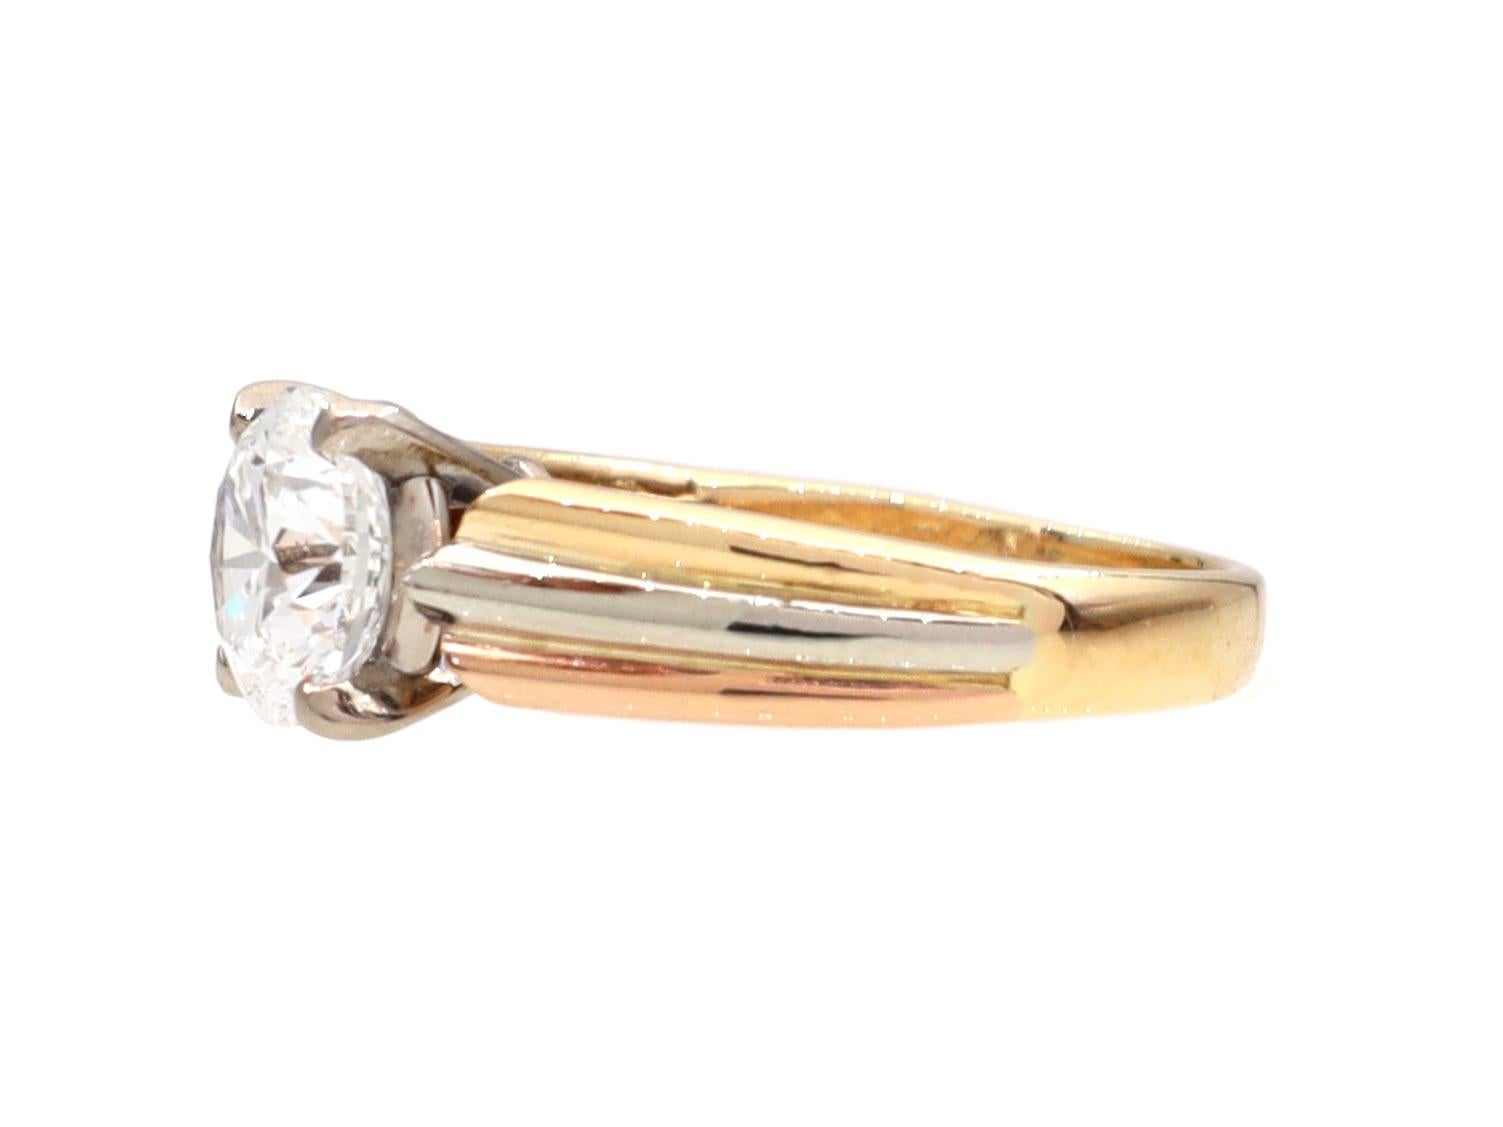 Cartier set diamond solitaire Trinity solitaire engagement ring in 18kt gold. Centrally set with a 2.01ct round Old European cut diamond, E colour, VS1 clarity in a four claw setting, to a raised circular collet with curving claws and pierced